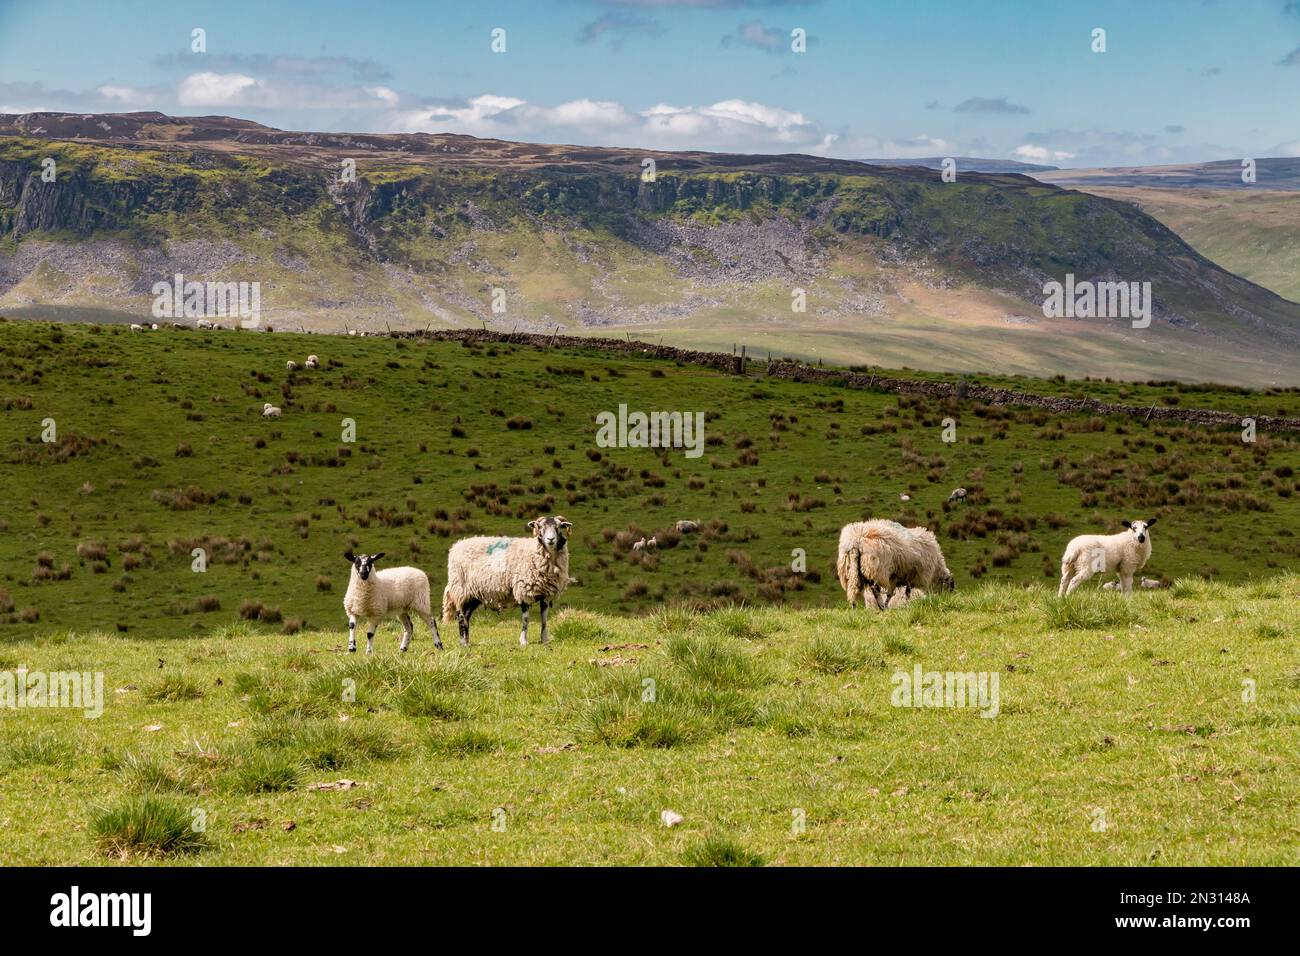 The dramatic Cronkley Scar as seen from across the dale at Wool Pits Hill farm. Stock Photo